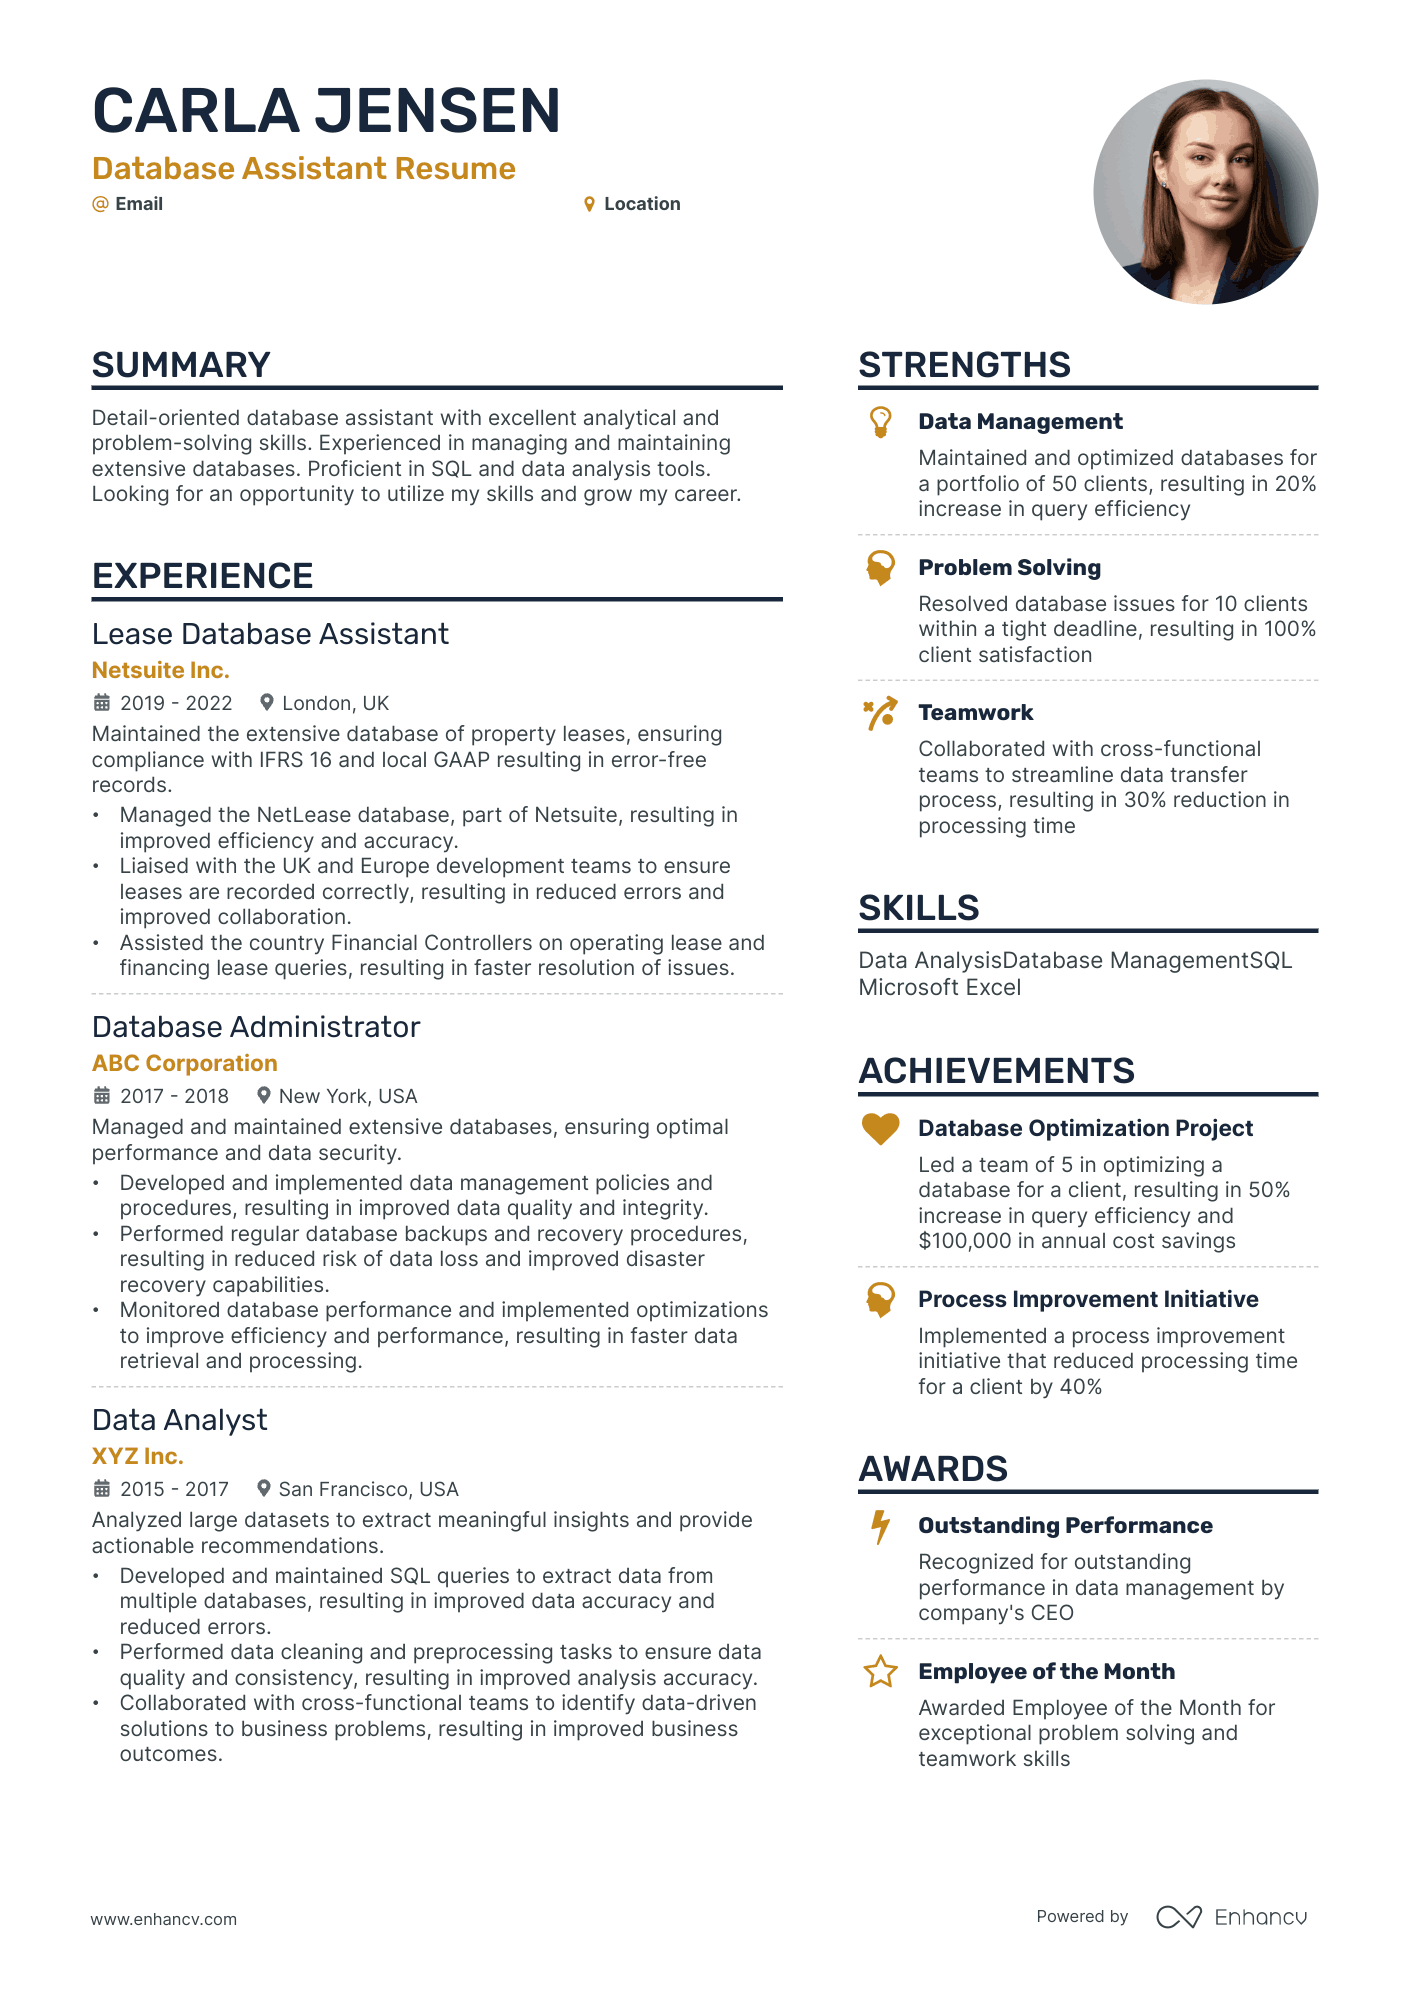 Database Assistant resume example